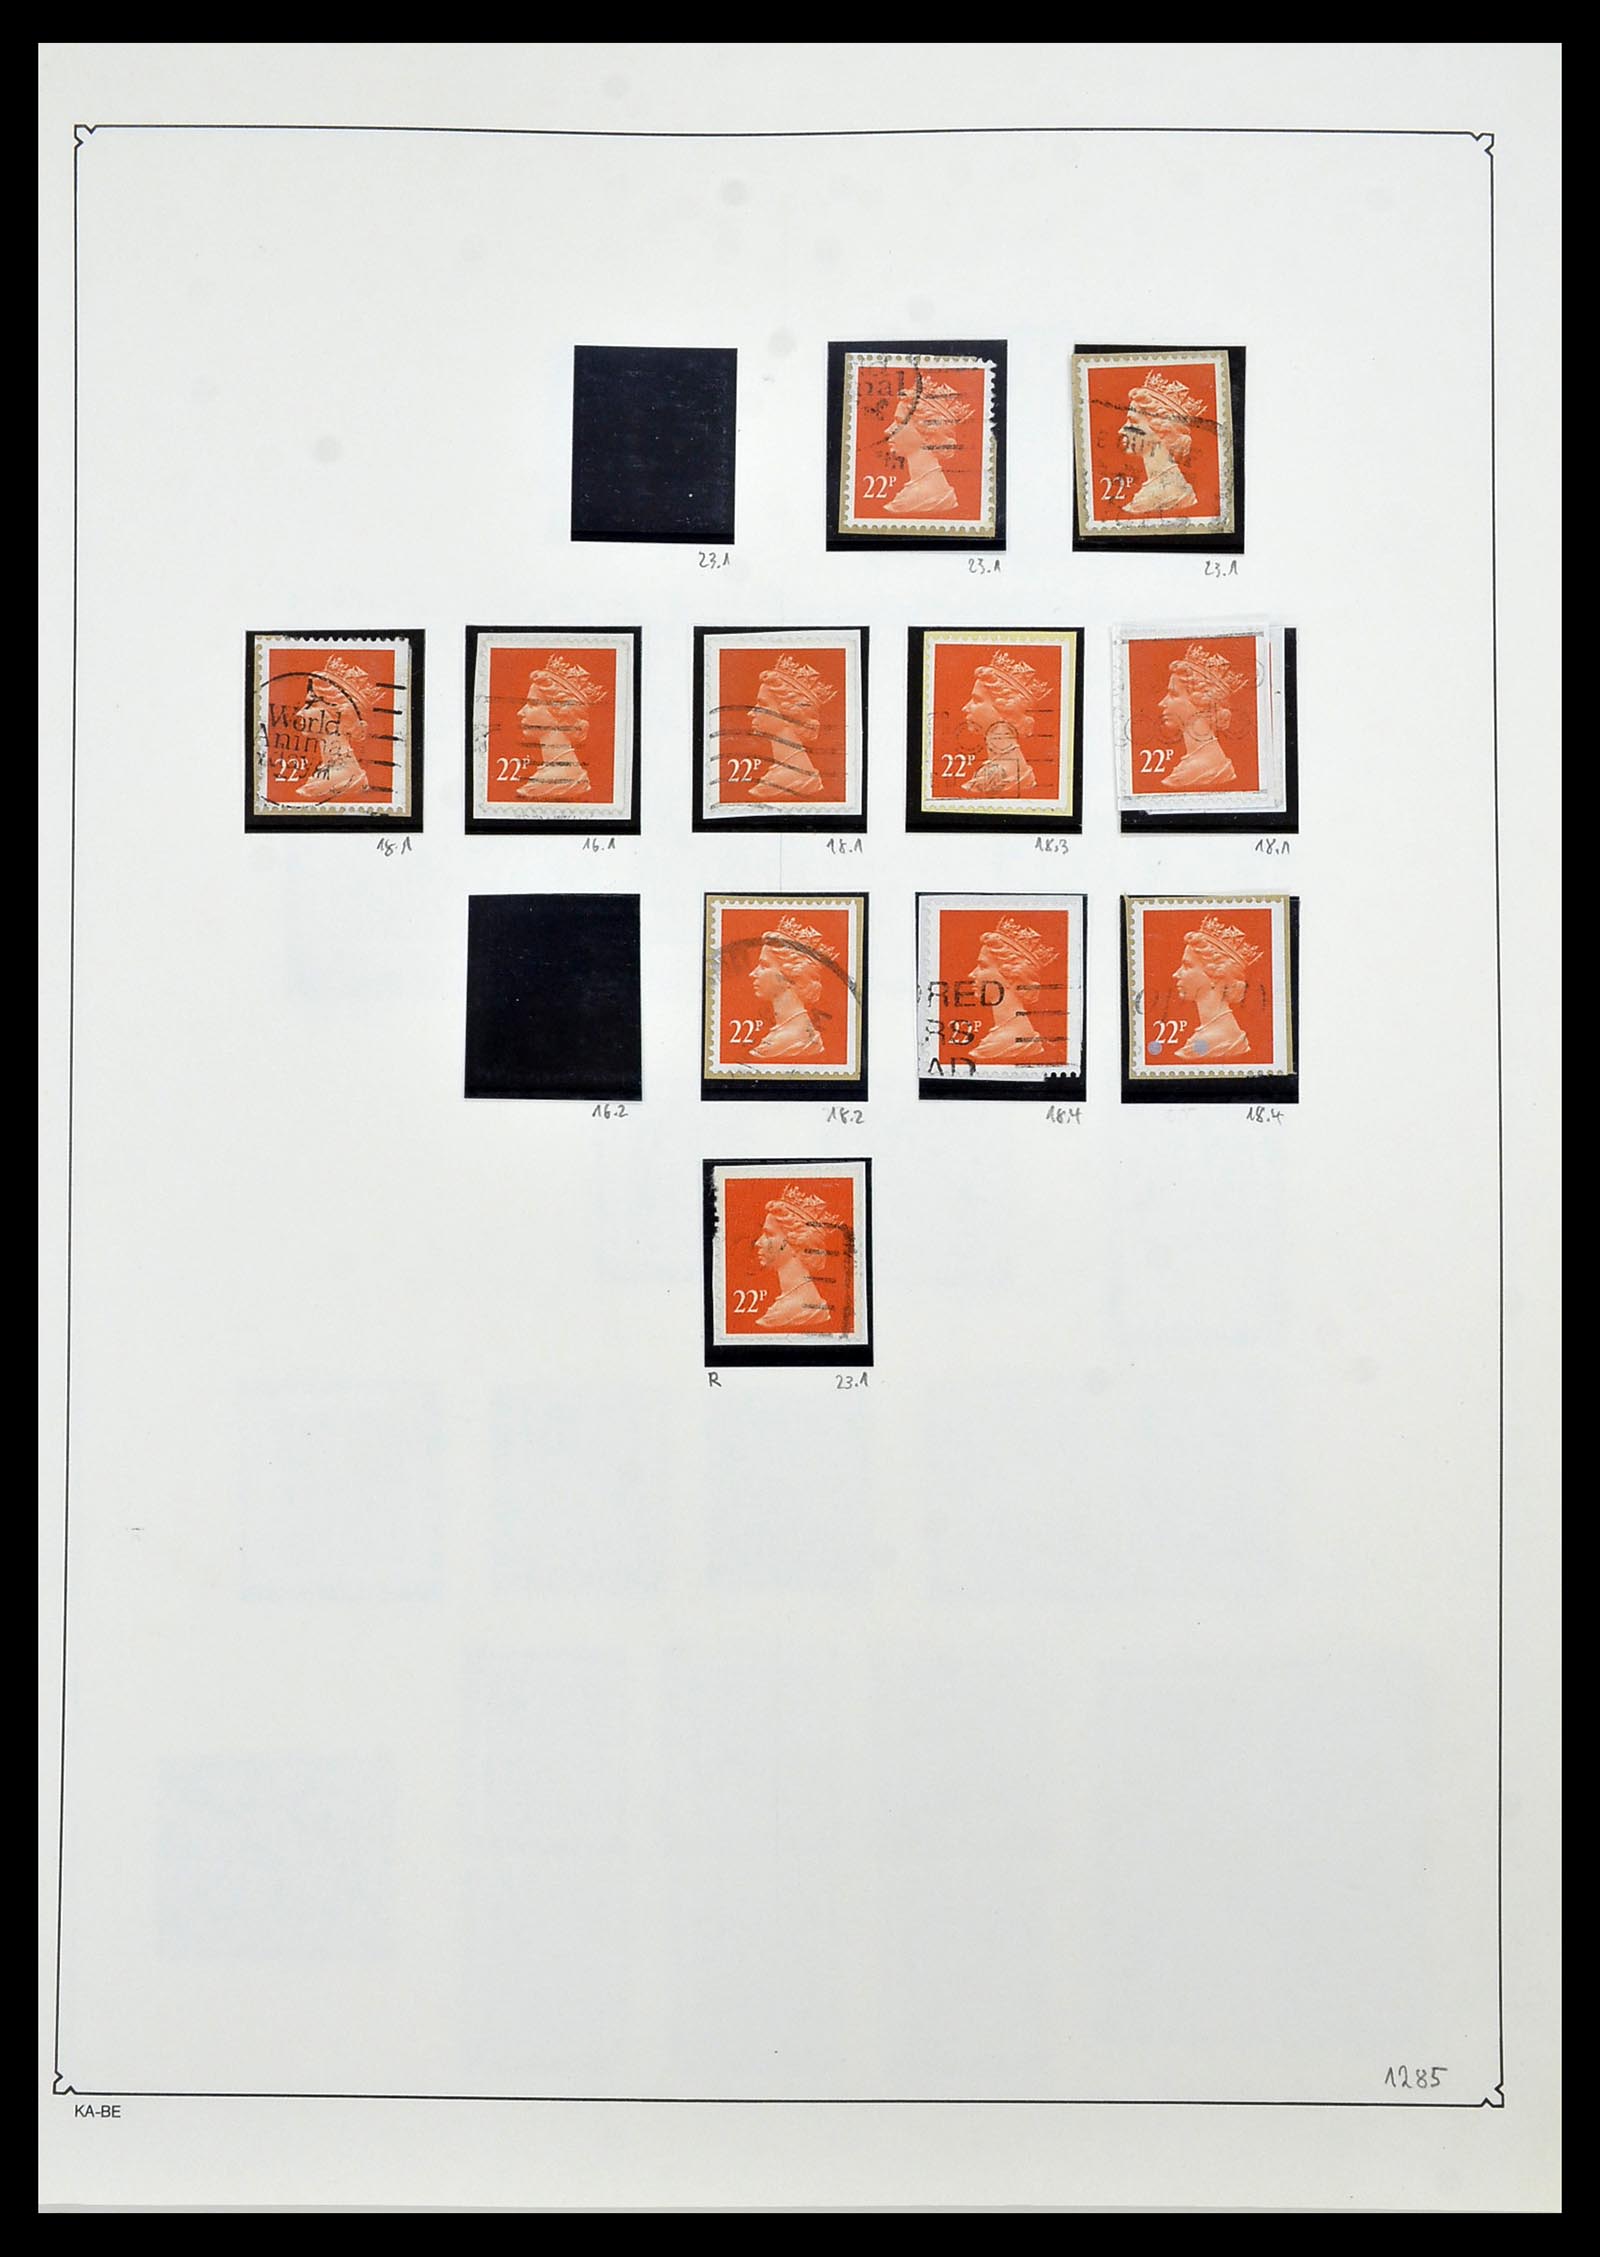 34221 097 - Stamp collection 34221 Great Britain Machins/castles 1971-2005.